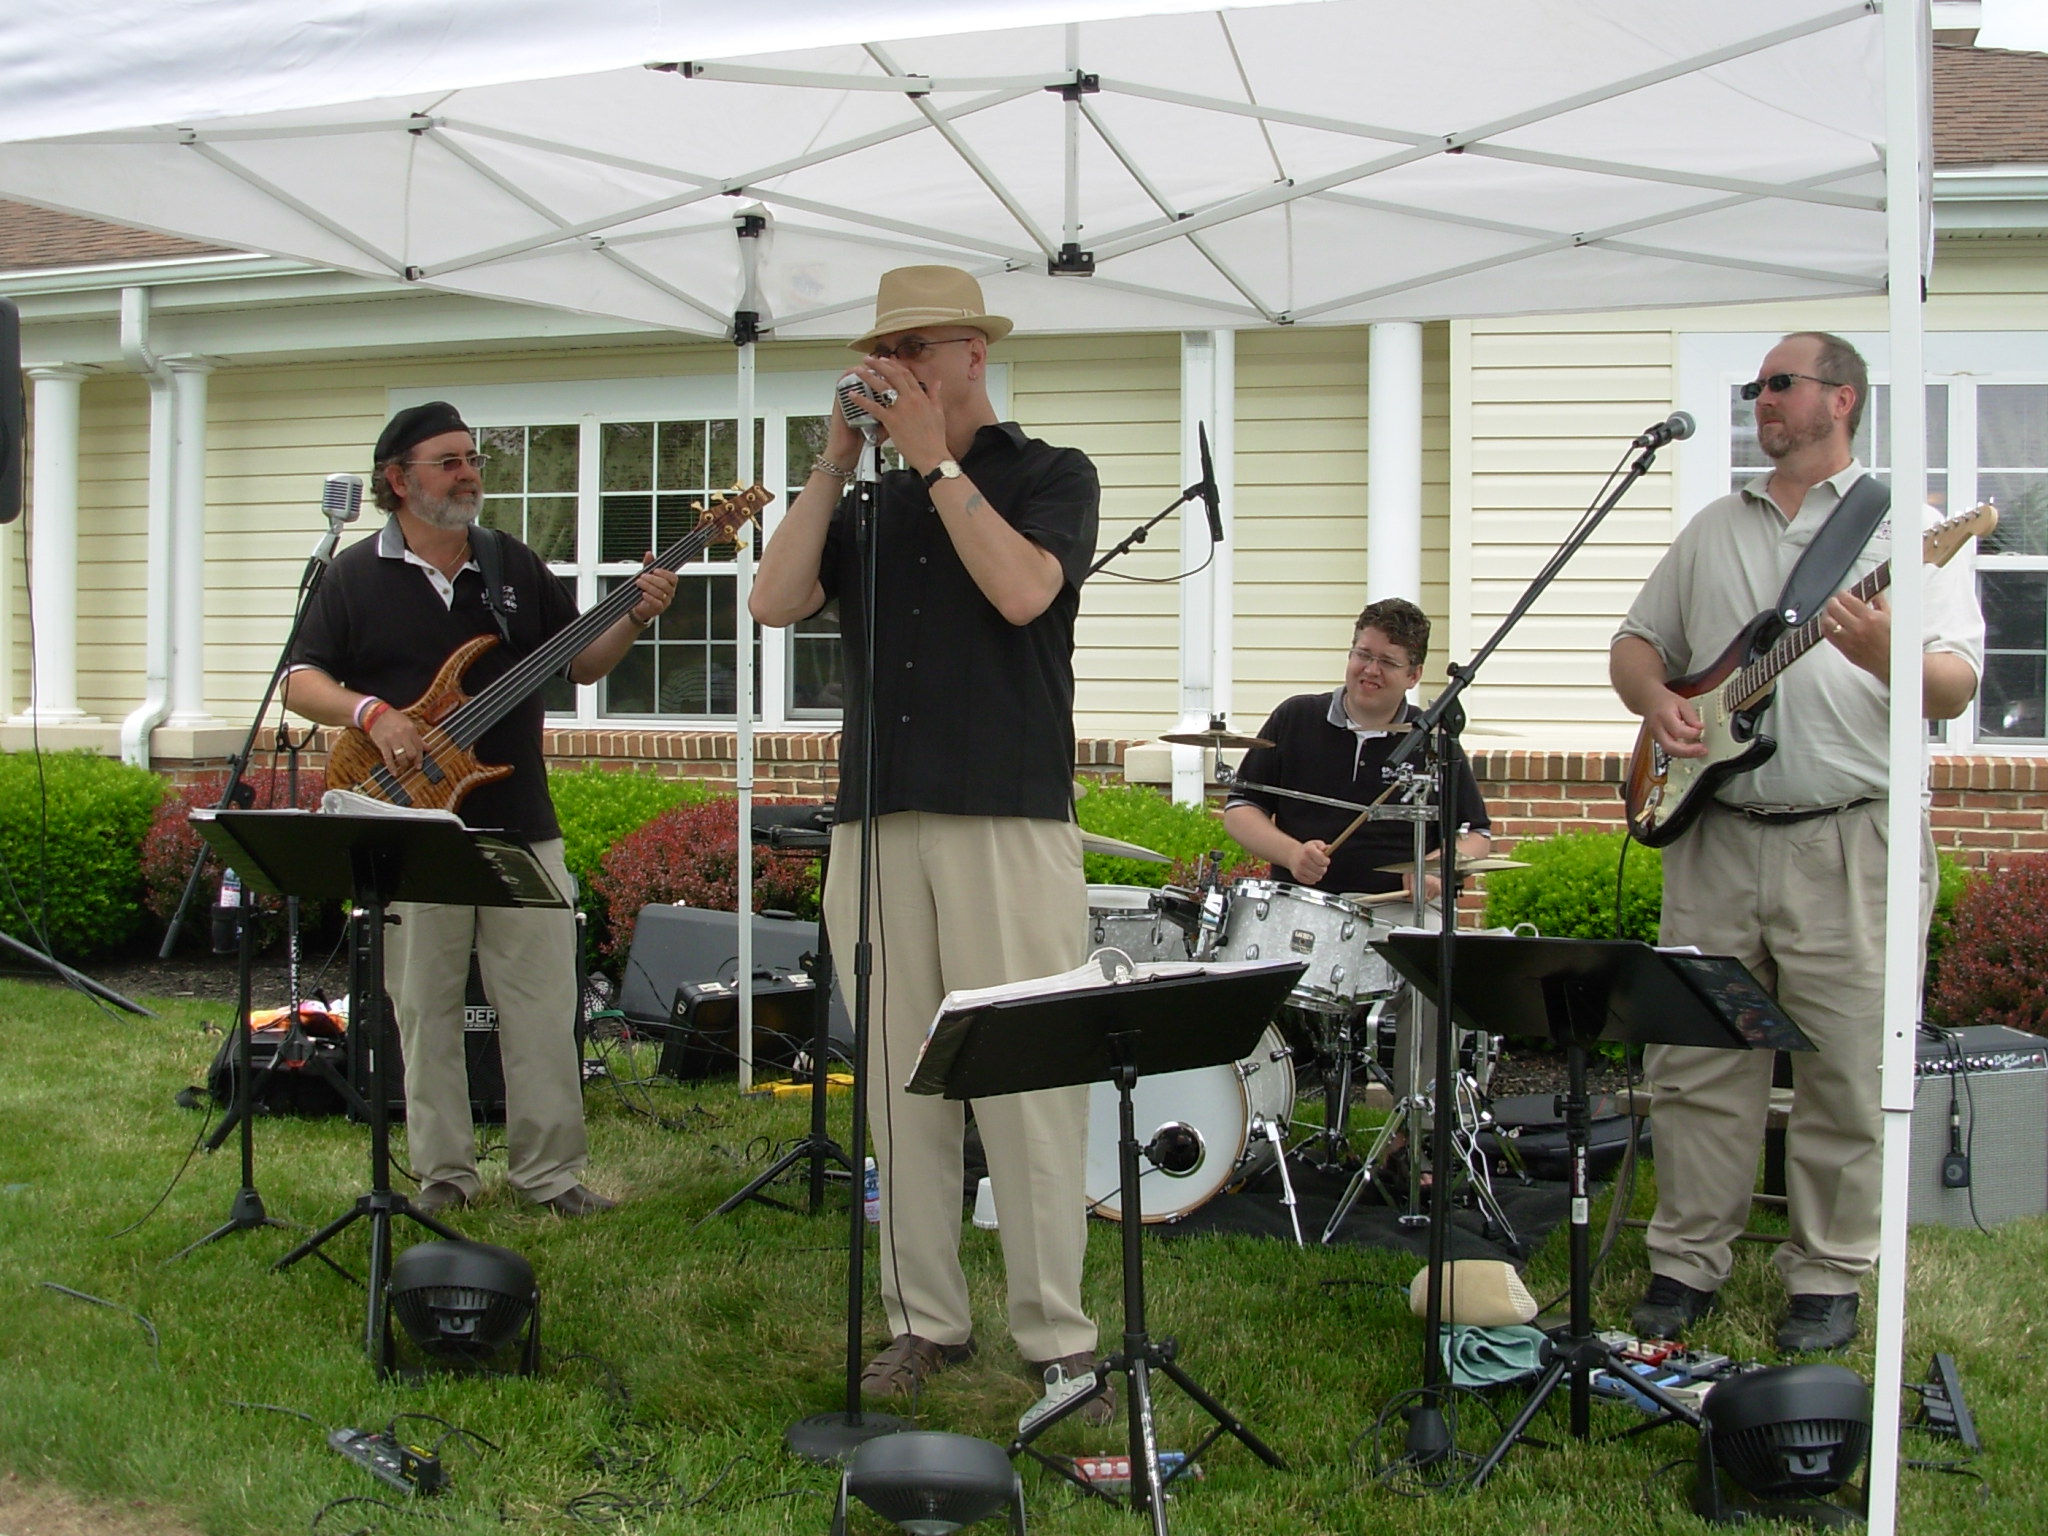 Playing at Elmcroft Show
